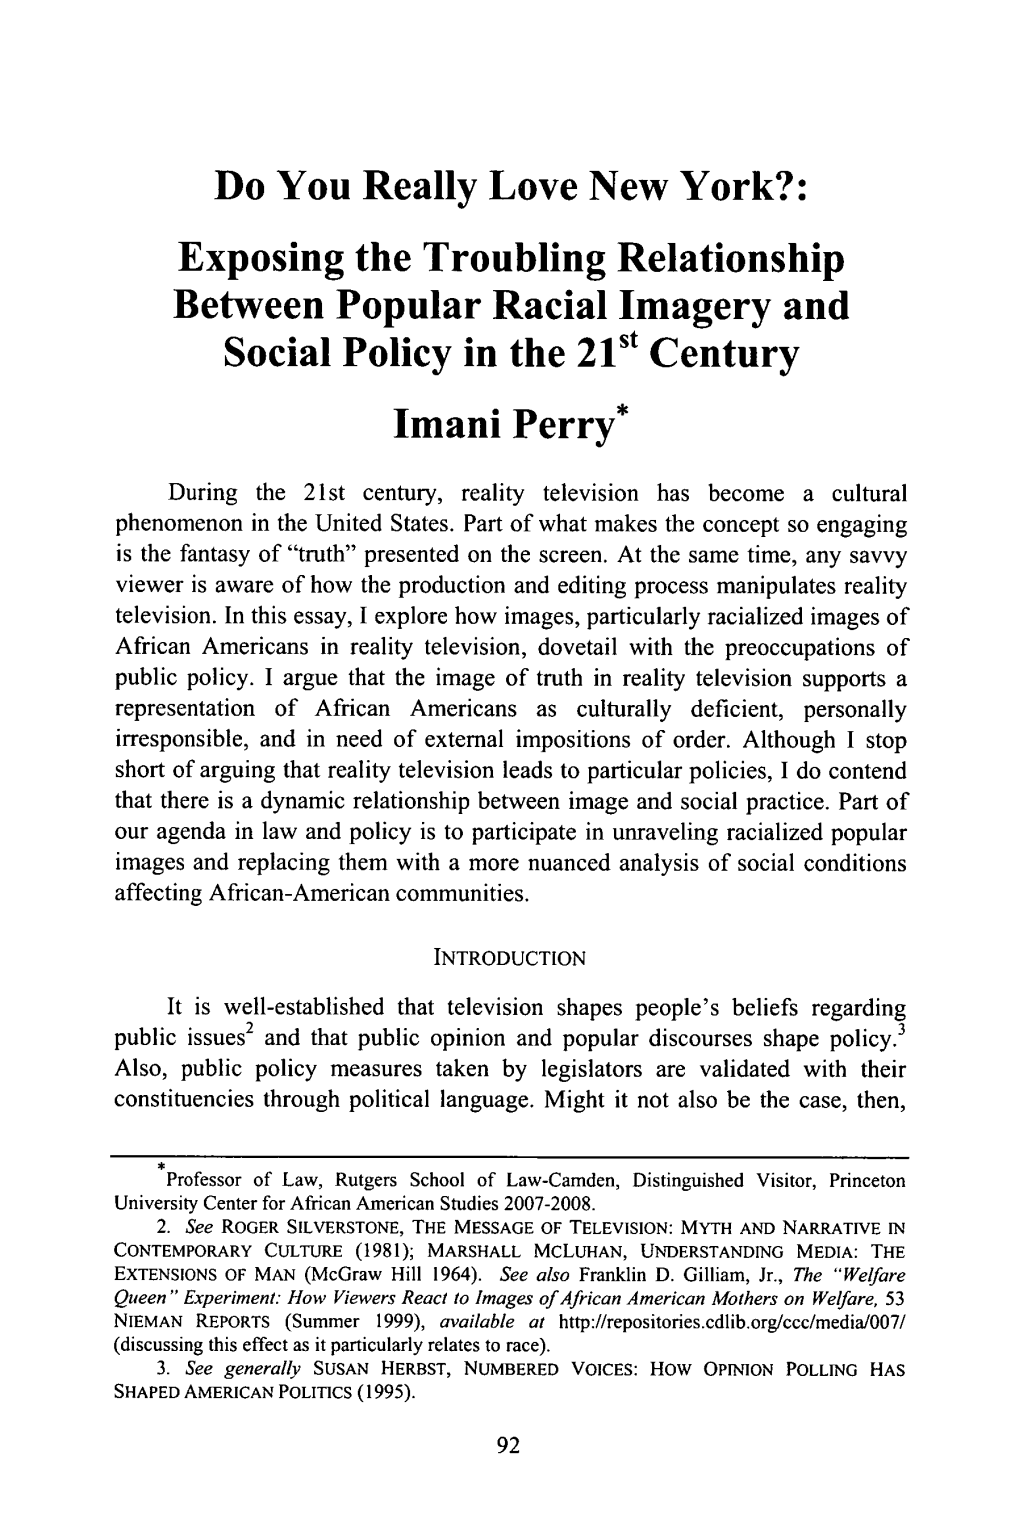 Exposing the Troubling Relationship Between Popular Racial Imagery and Social Policy in the 21St Century Imani Perry*